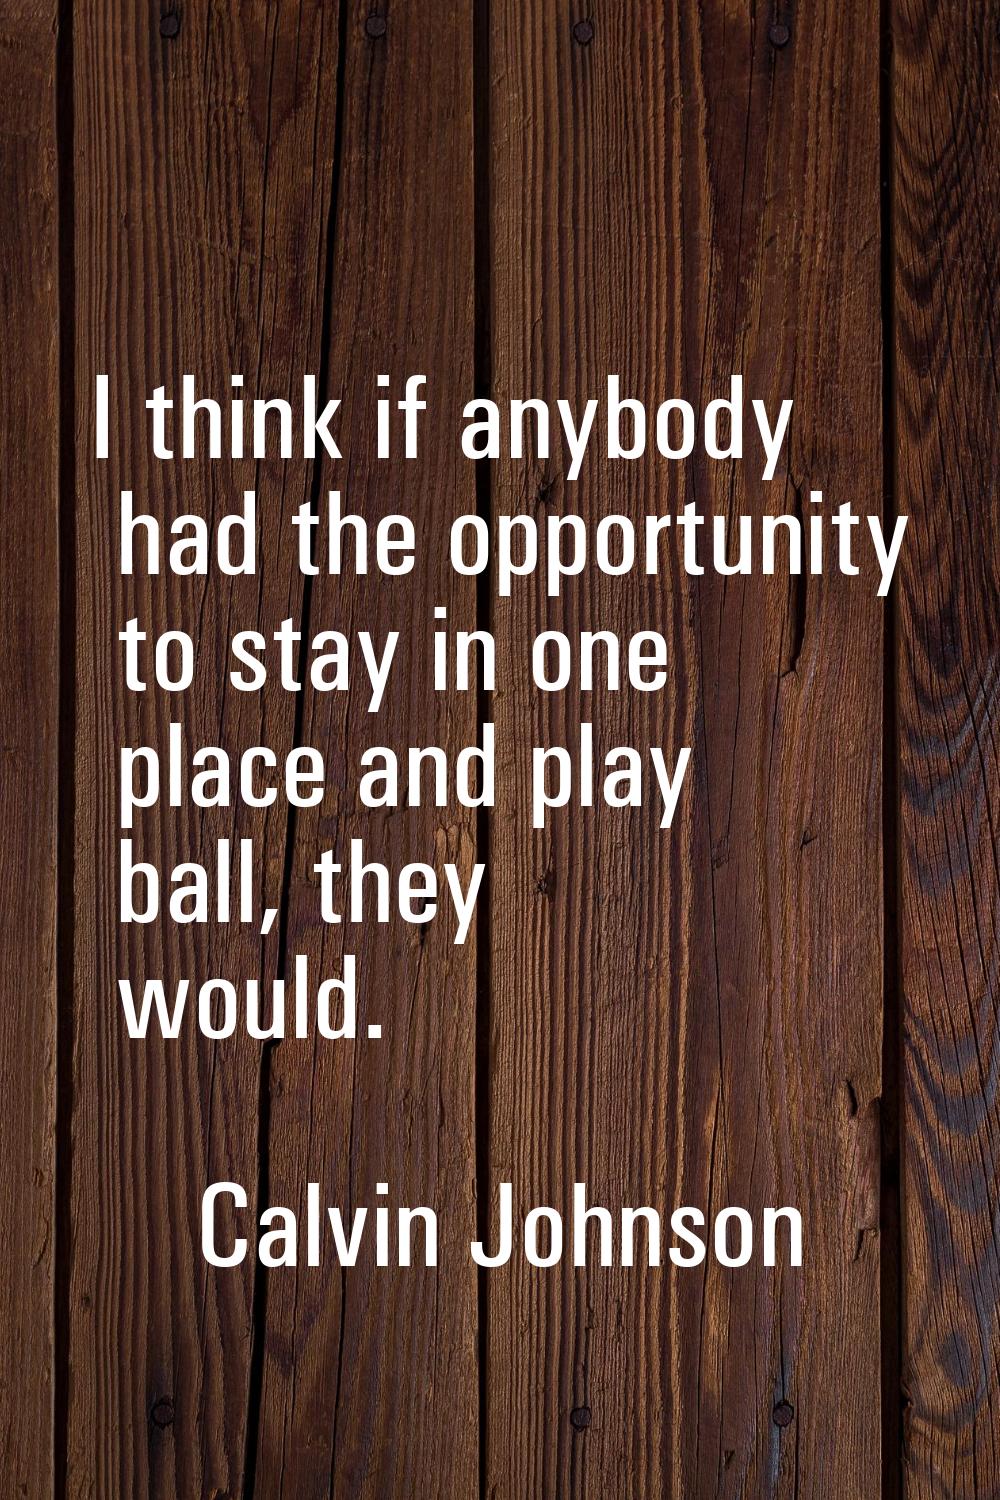 I think if anybody had the opportunity to stay in one place and play ball, they would.